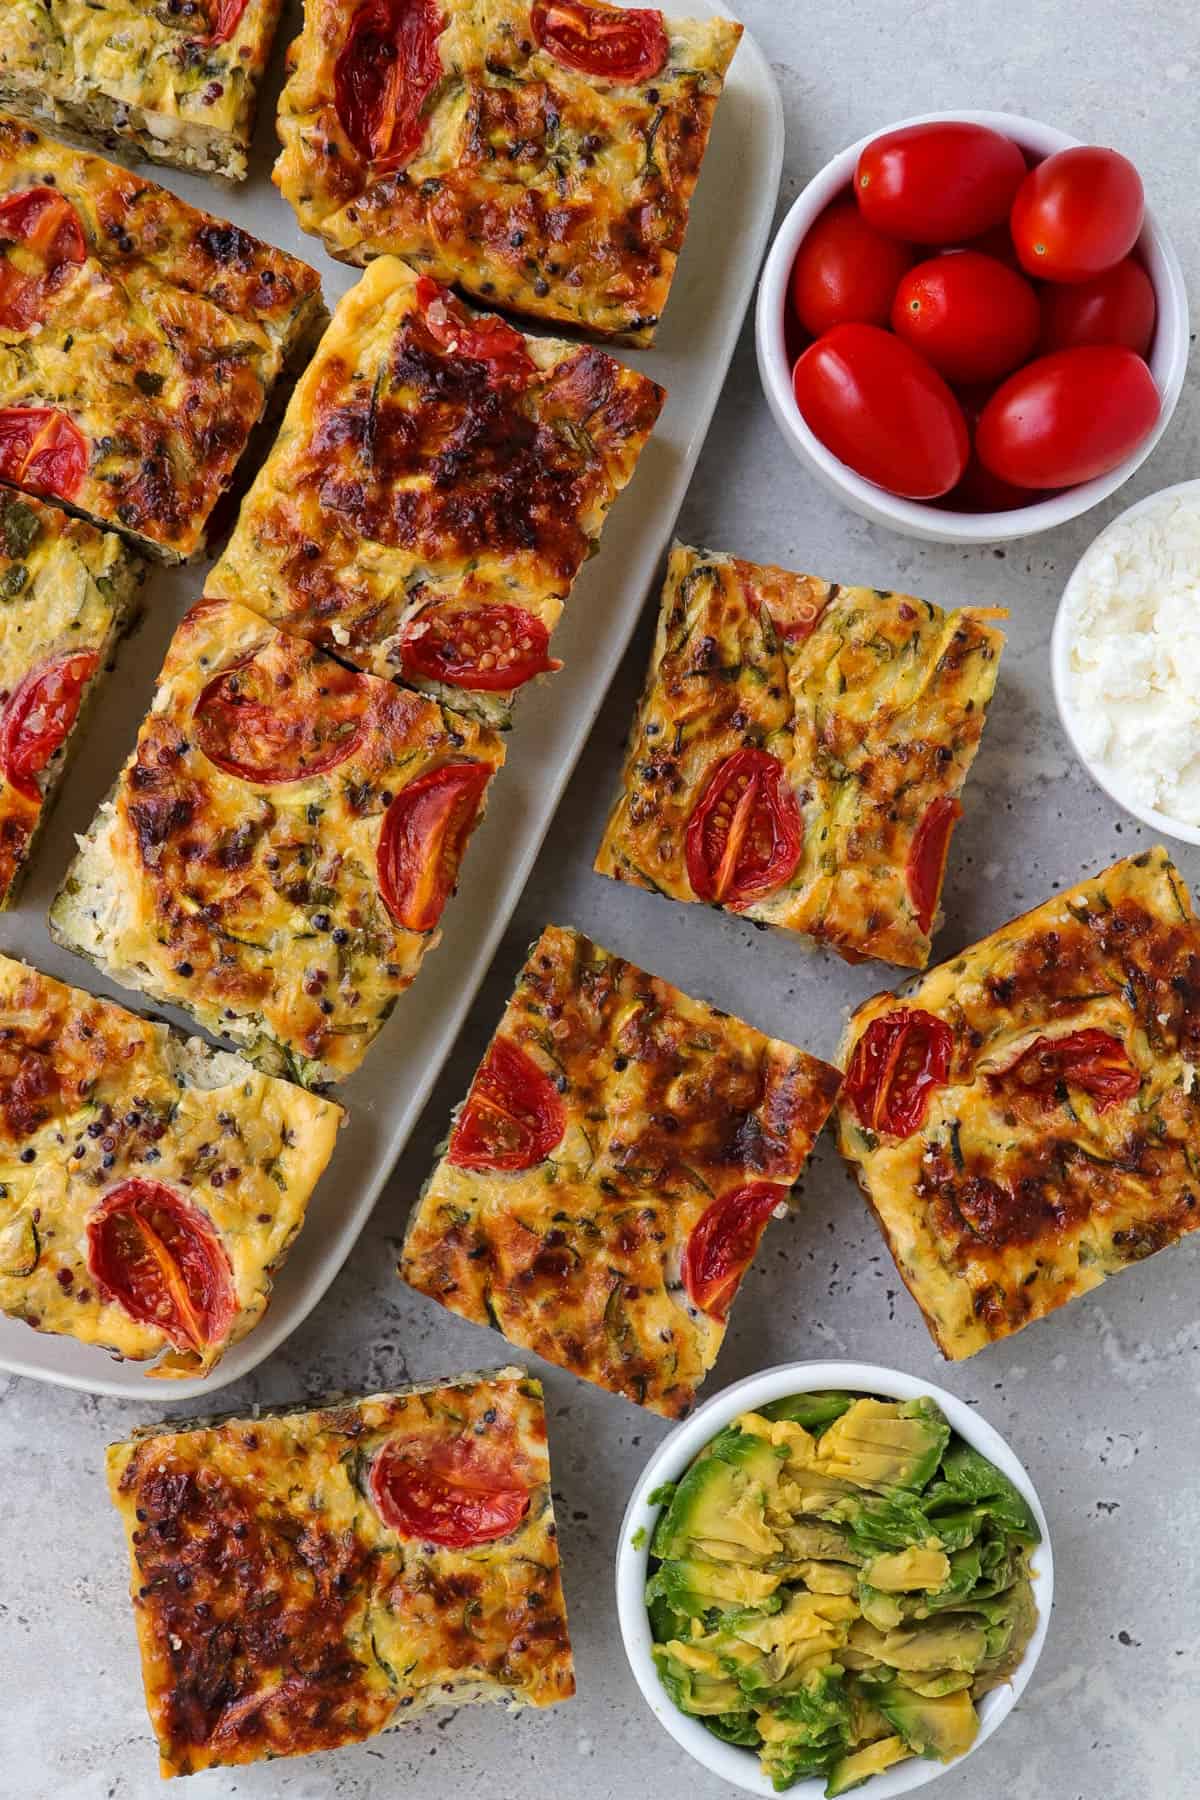 Some cut up zucchini slice squares on a plate and some on the table. Small dishes of cottage cheese, mashed avocado and cherry tomatoes for decoration.